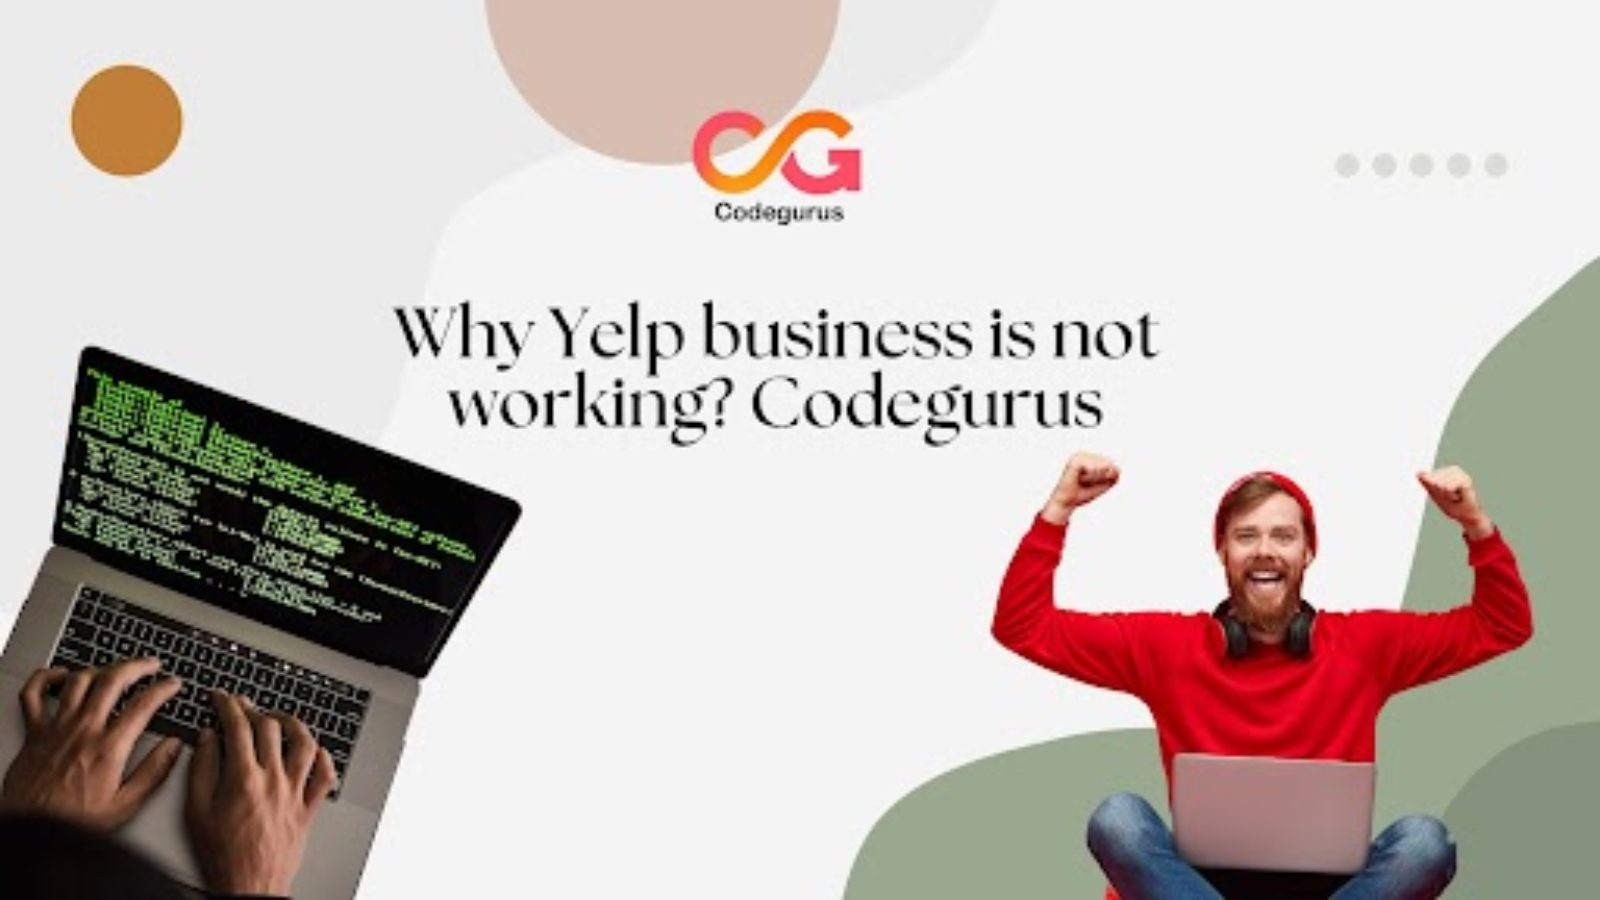 Yelp business is not working